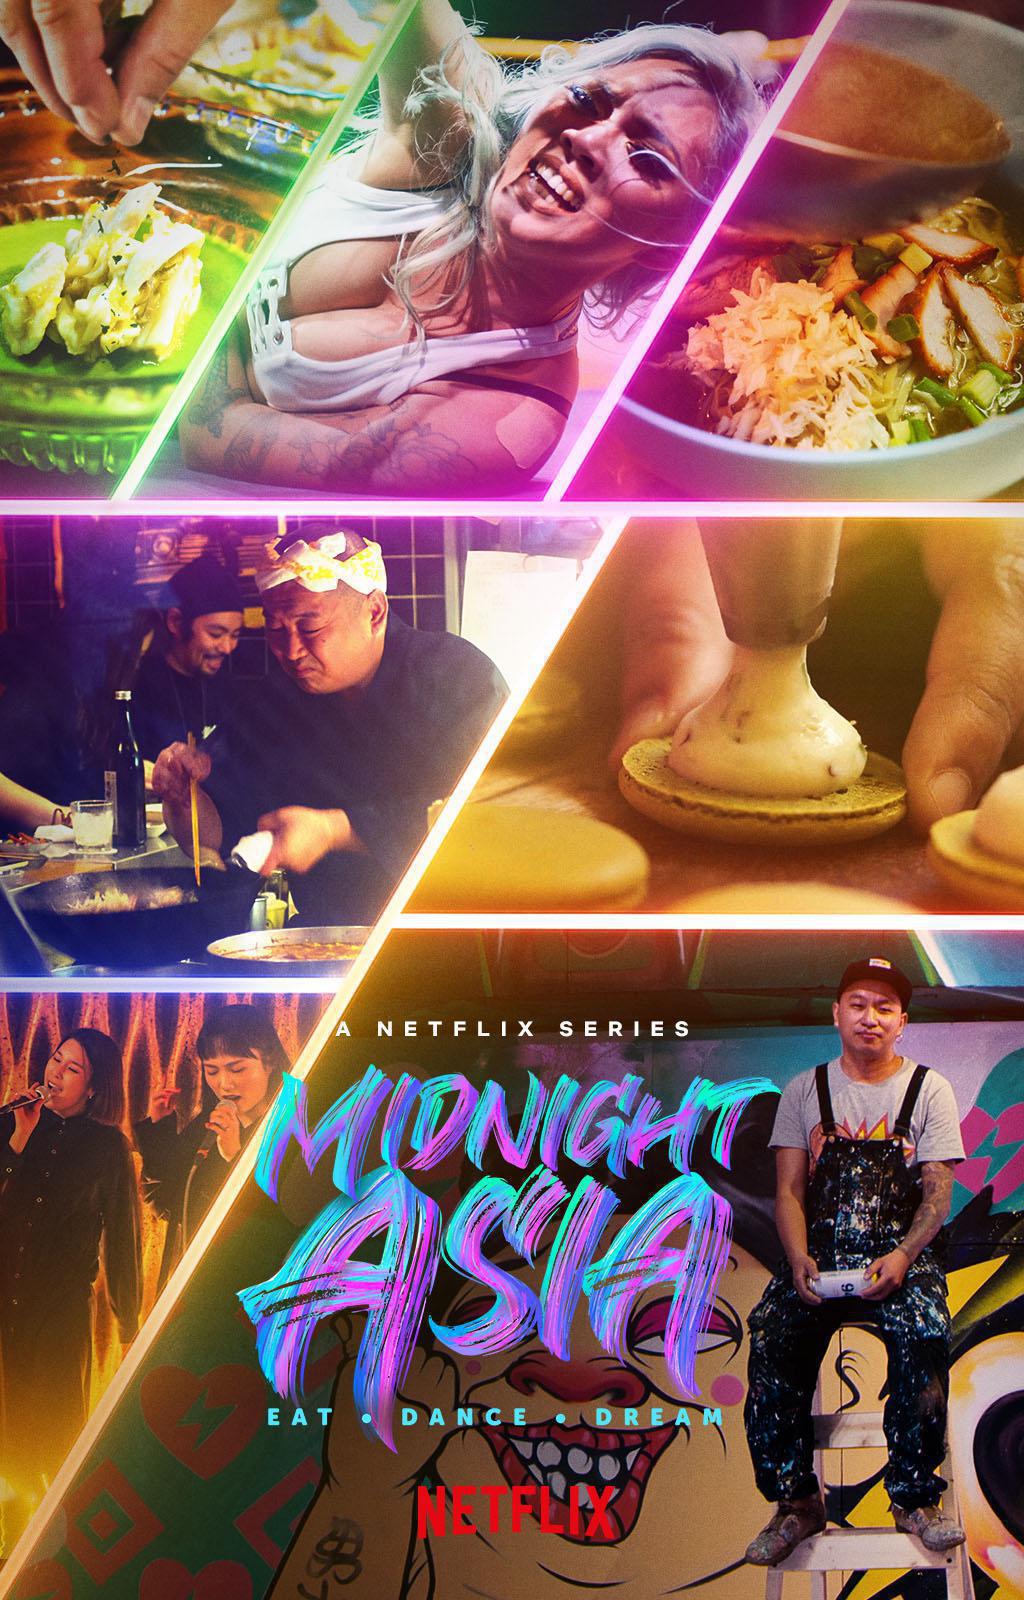 TV ratings for Midnight Asia: Eat Dance Dream in Russia. Netflix TV series